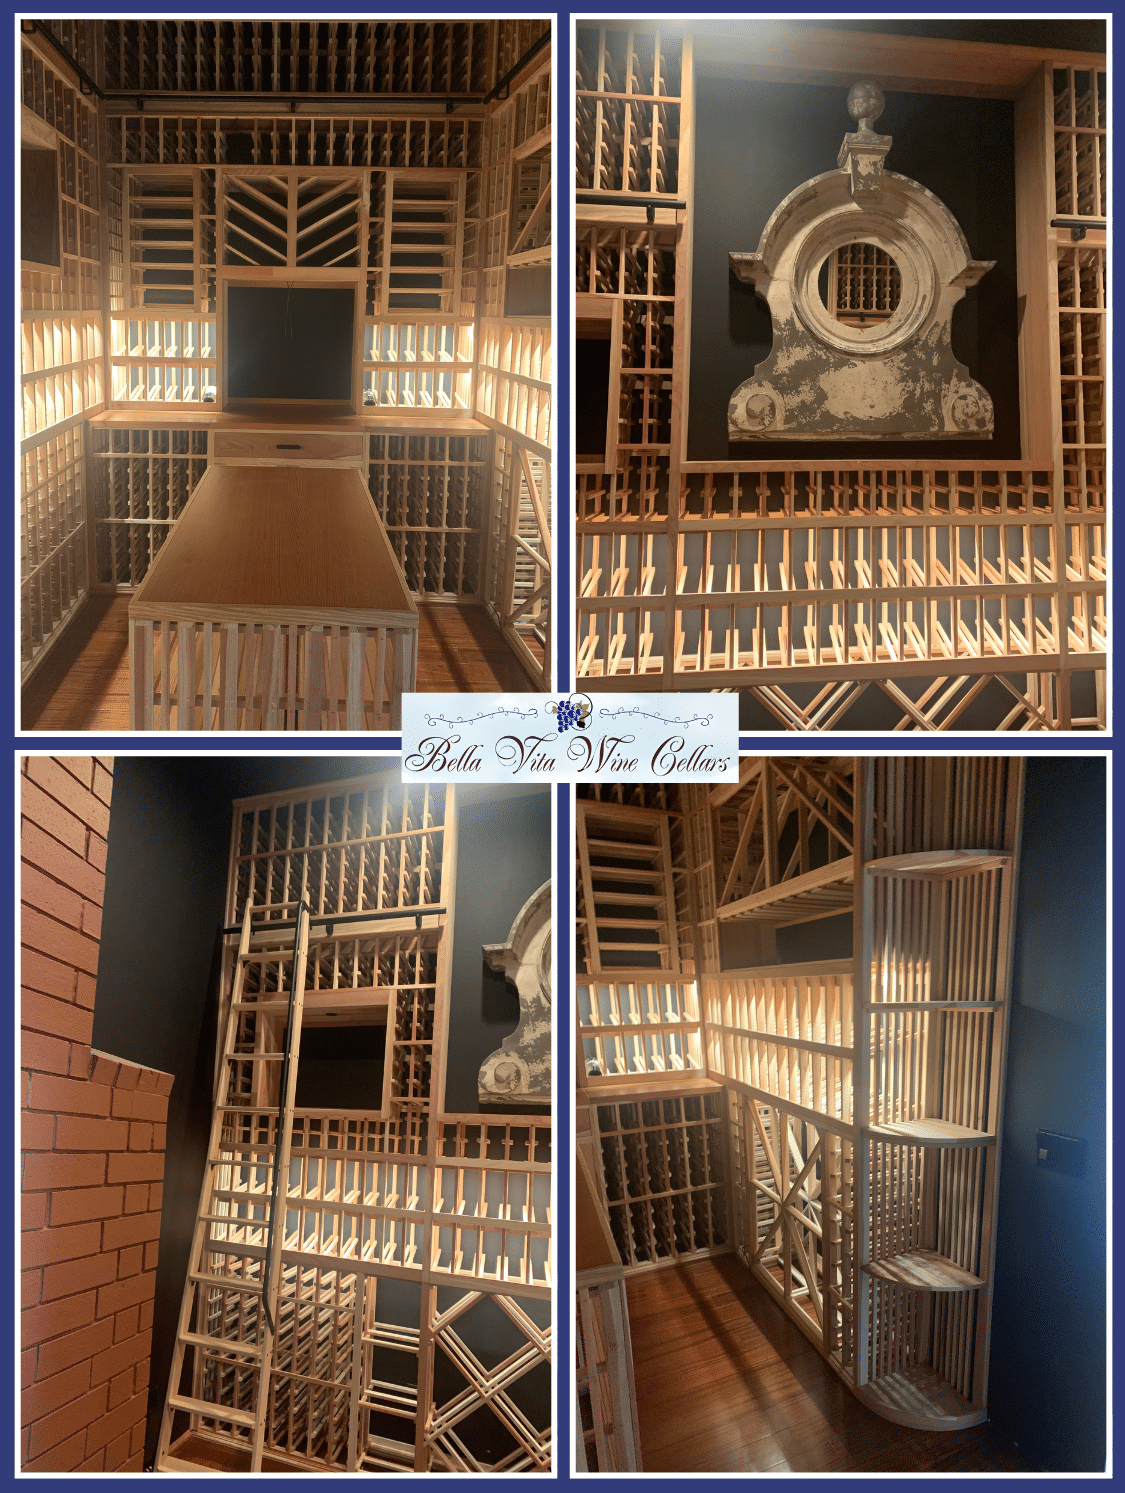 This12-foot-high traditional home wine cellar boasts a 2100-bottle capacity and classic redwood wine racking